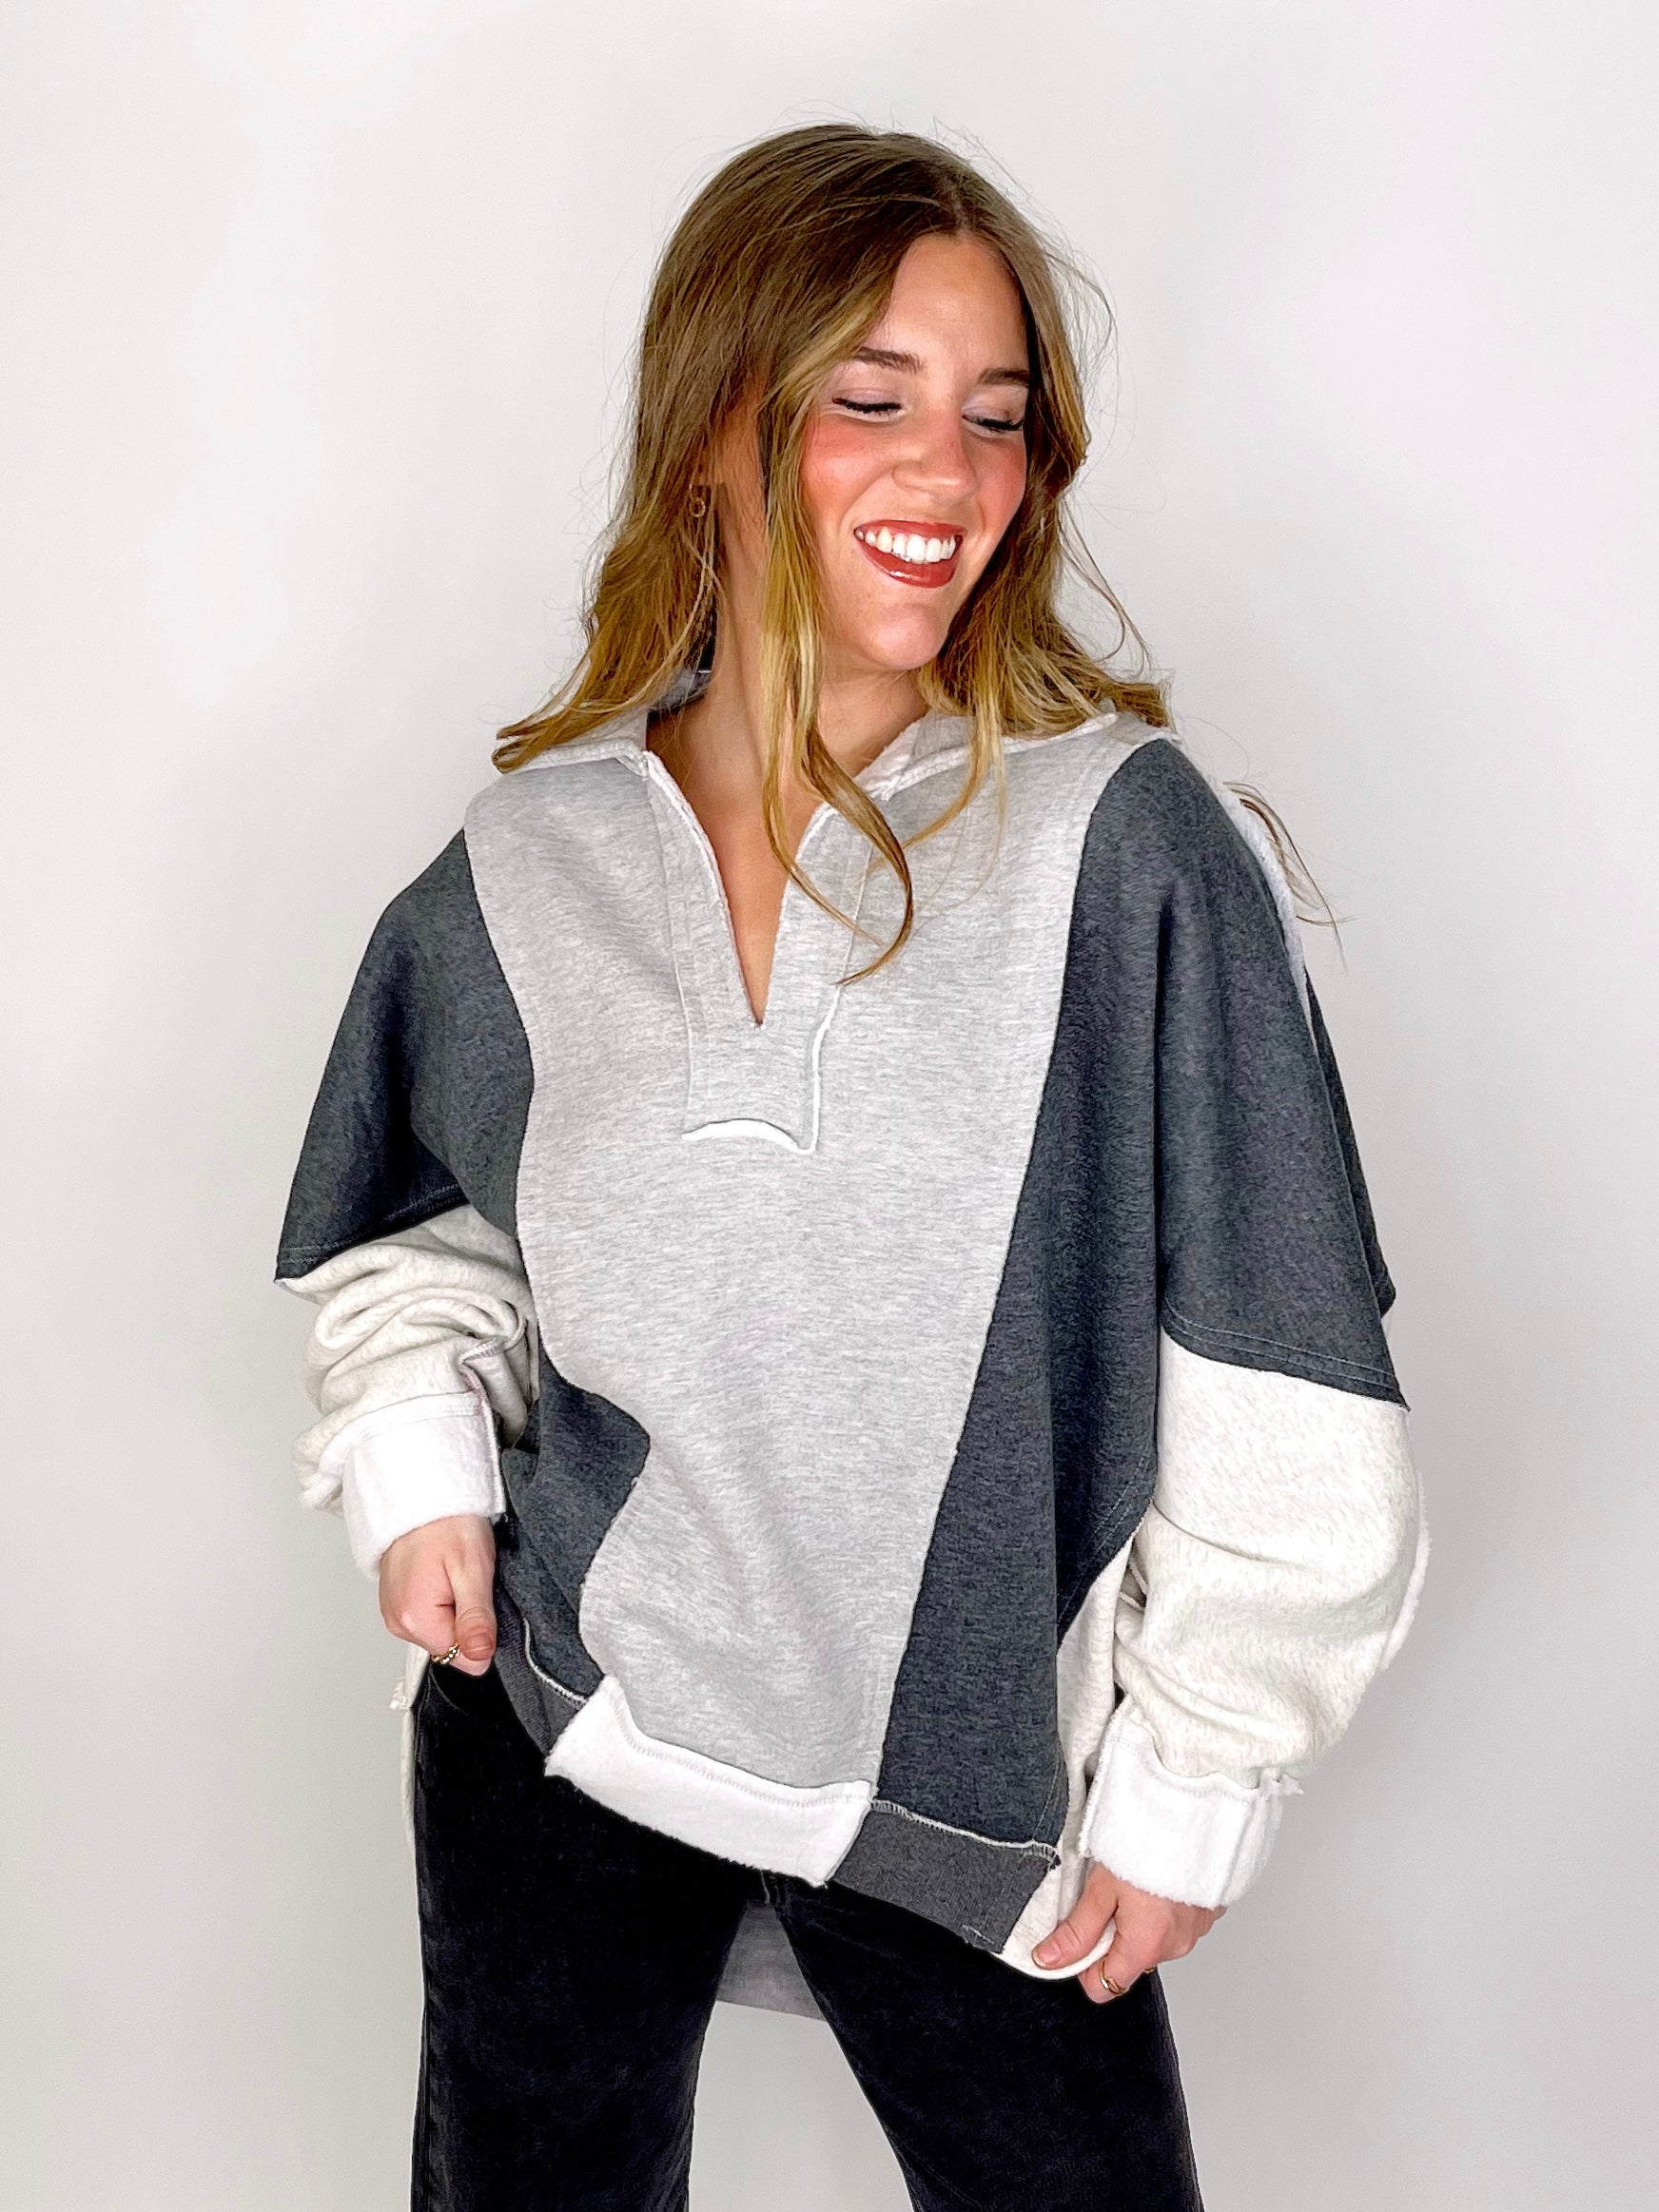 The Abba Sweatshirt-Sweatshirt-Aemi + Co-The Village Shoppe, Women’s Fashion Boutique, Shop Online and In Store - Located in Muscle Shoals, AL.